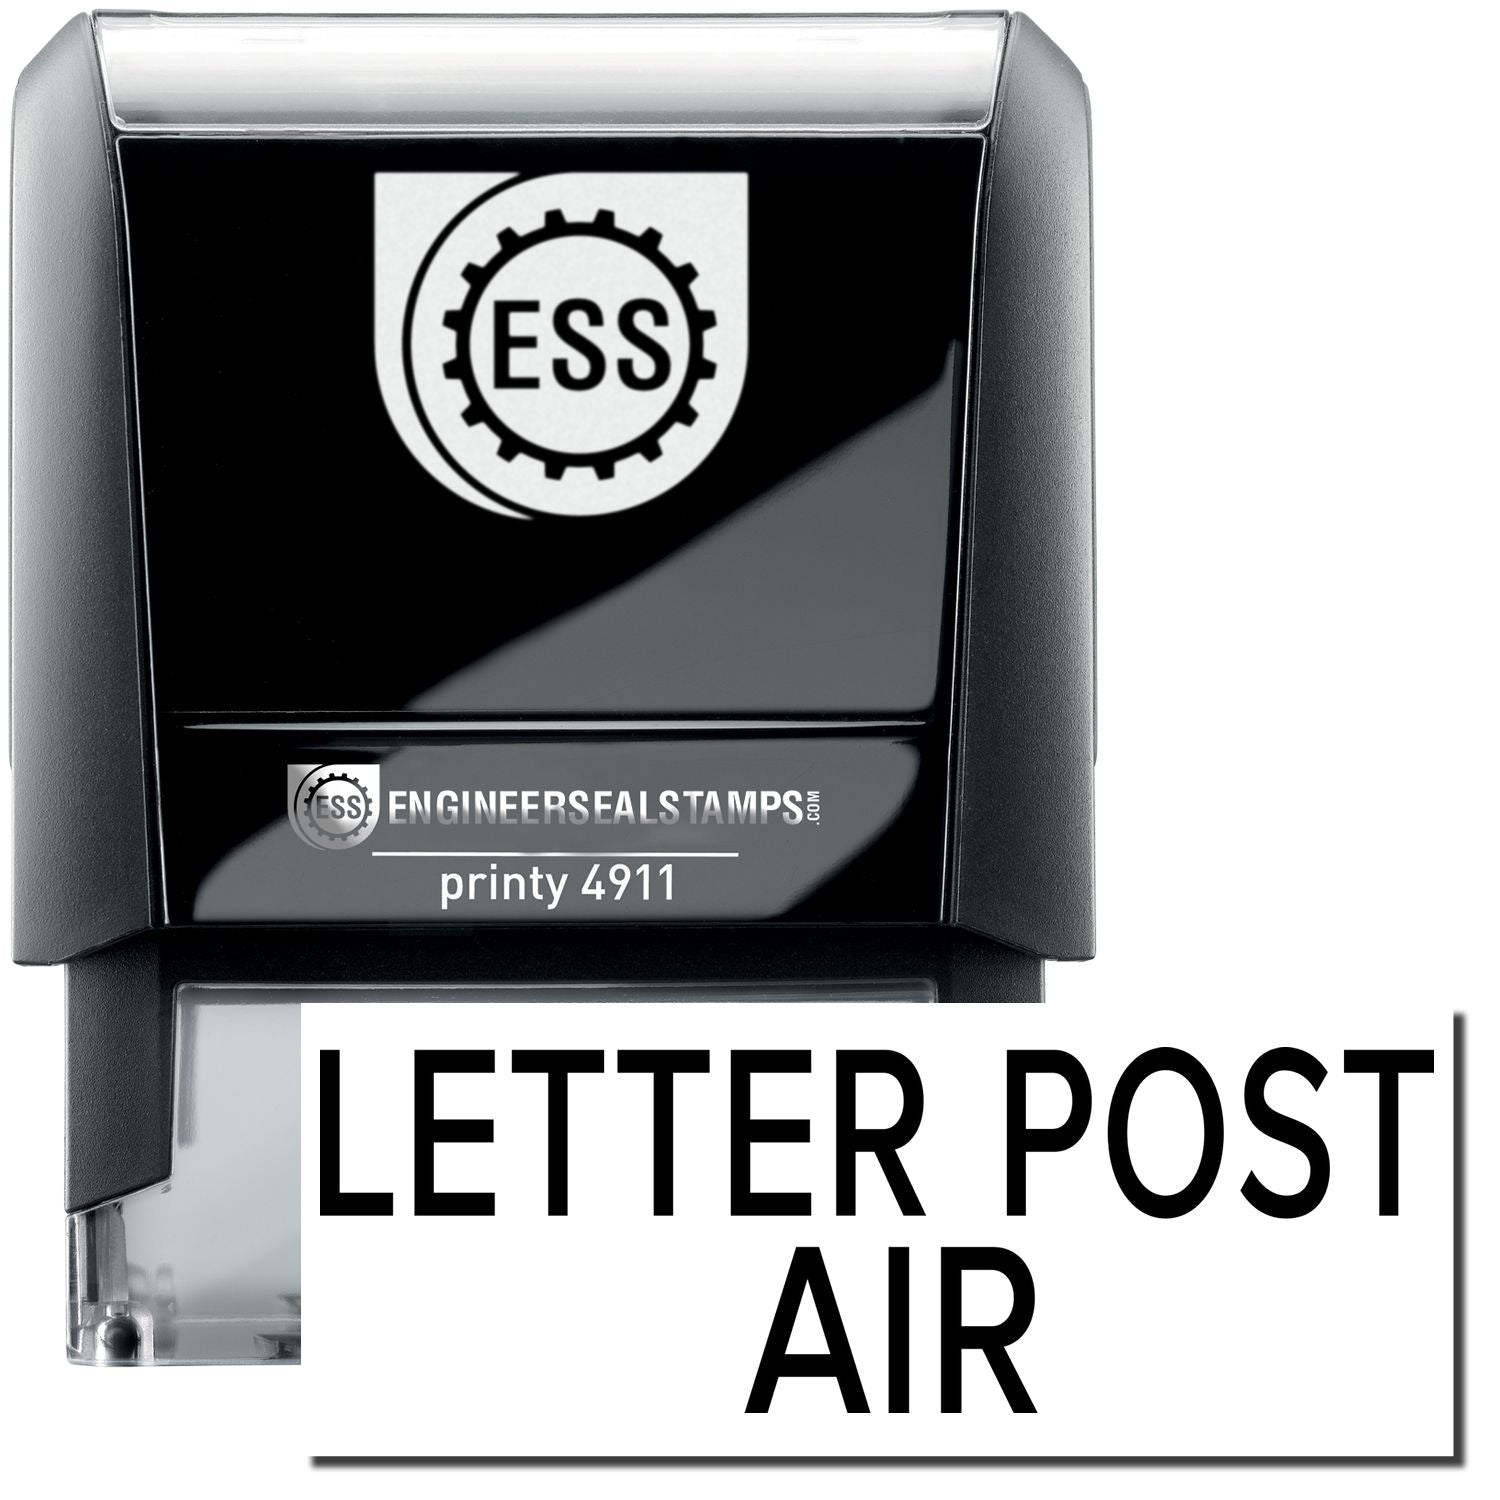 A self-inking stamp with a stamped image showing how the text "LETTER POST AIR" is displayed after stamping.